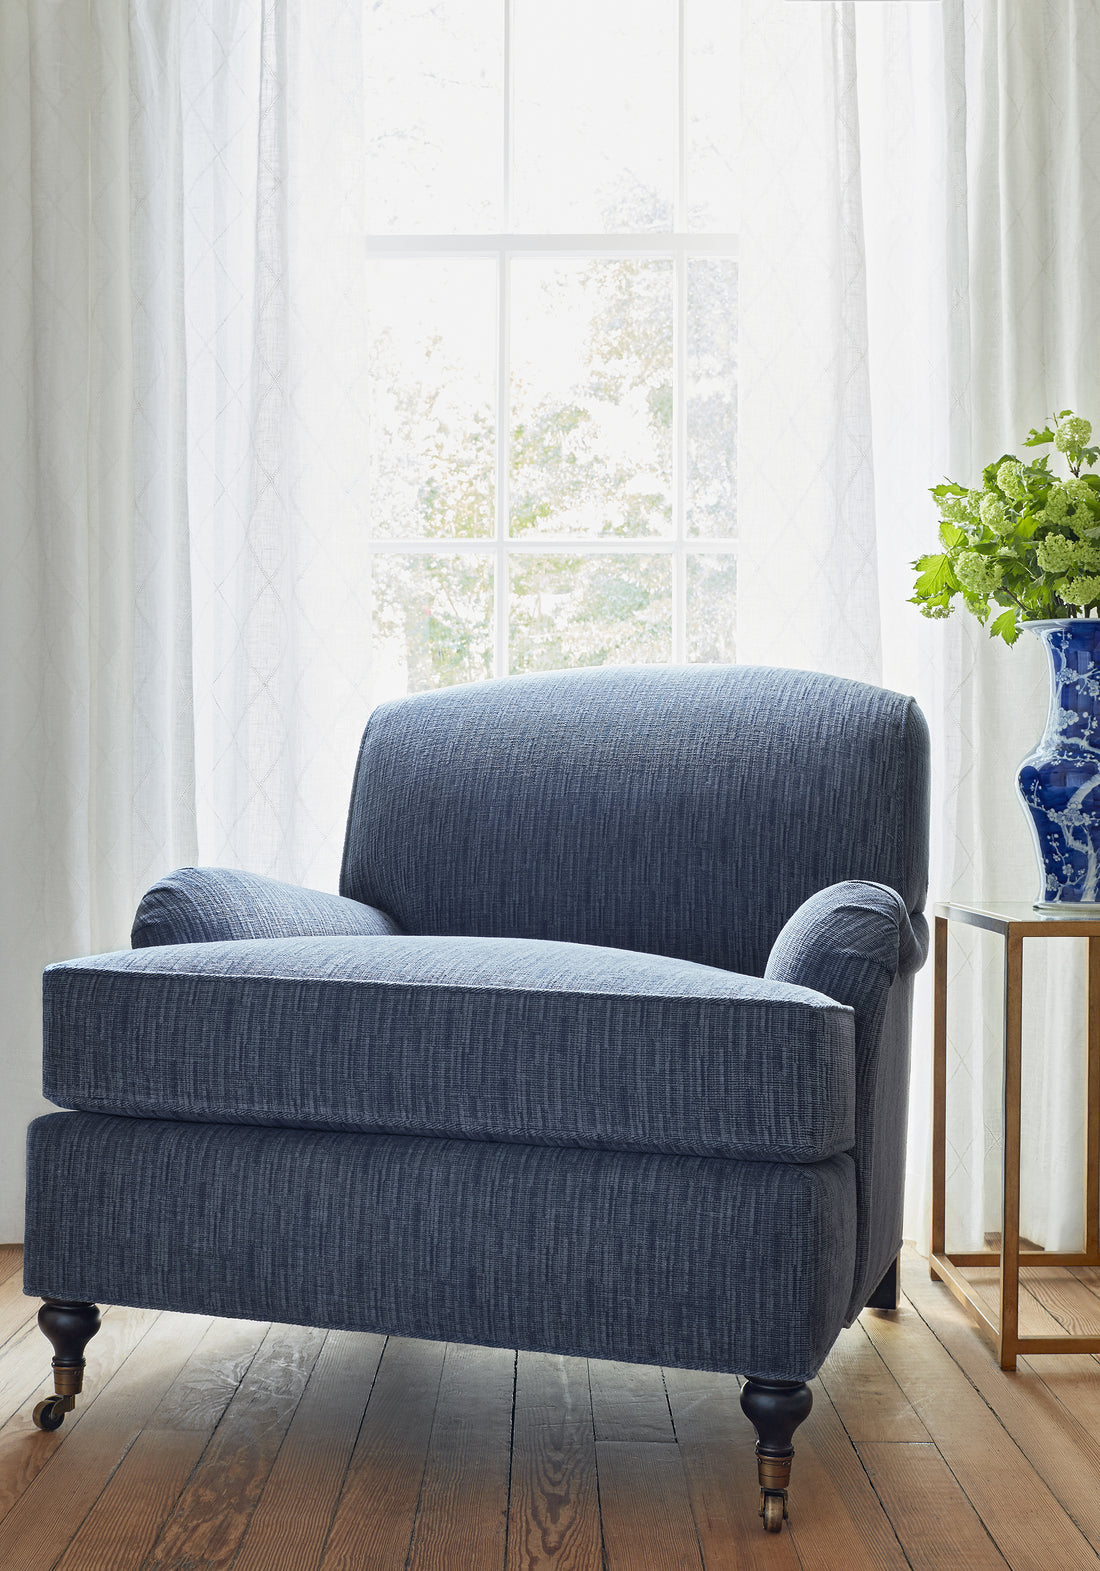 Chatham Chair in Dominic woven fabric in navy color - pattern number W789123 by Thibaut in the Reverie collection